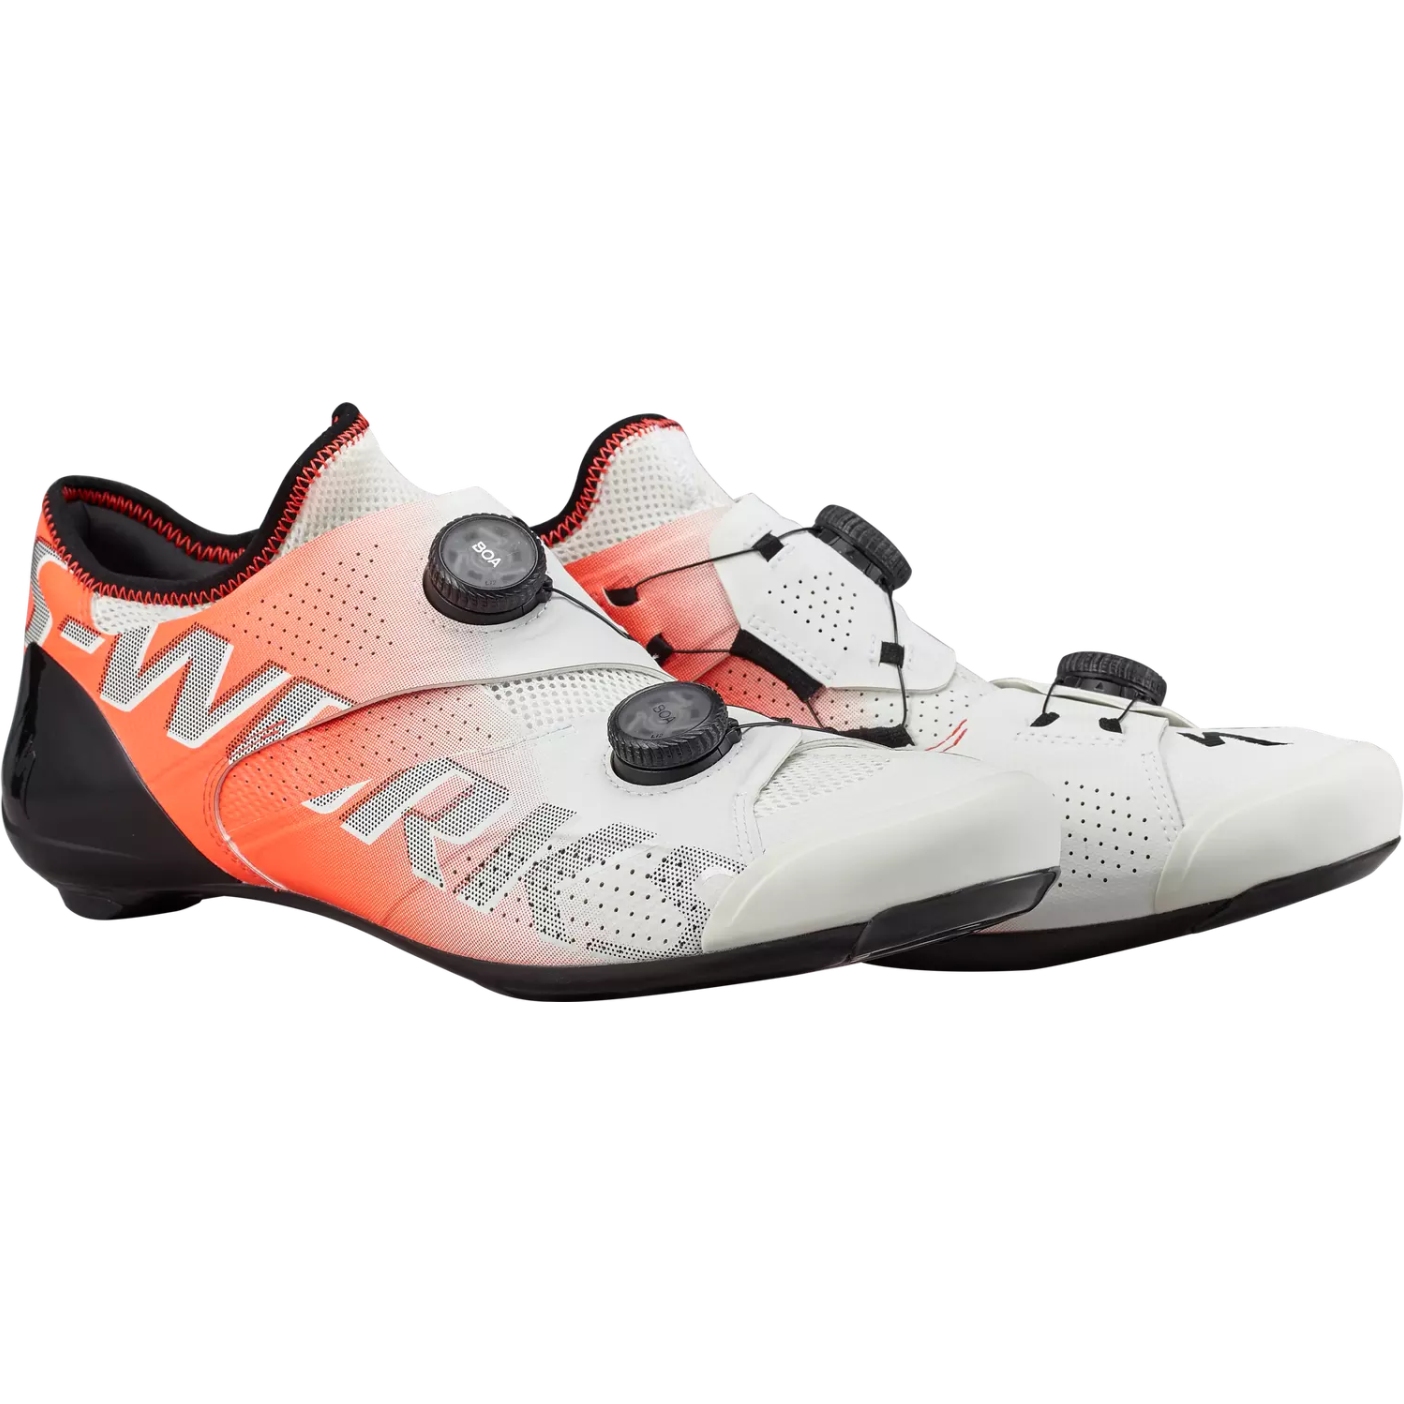 Picture of Specialized S-Works Ares Road Shoes - Dune White/Fiery Red - 2nd Choice